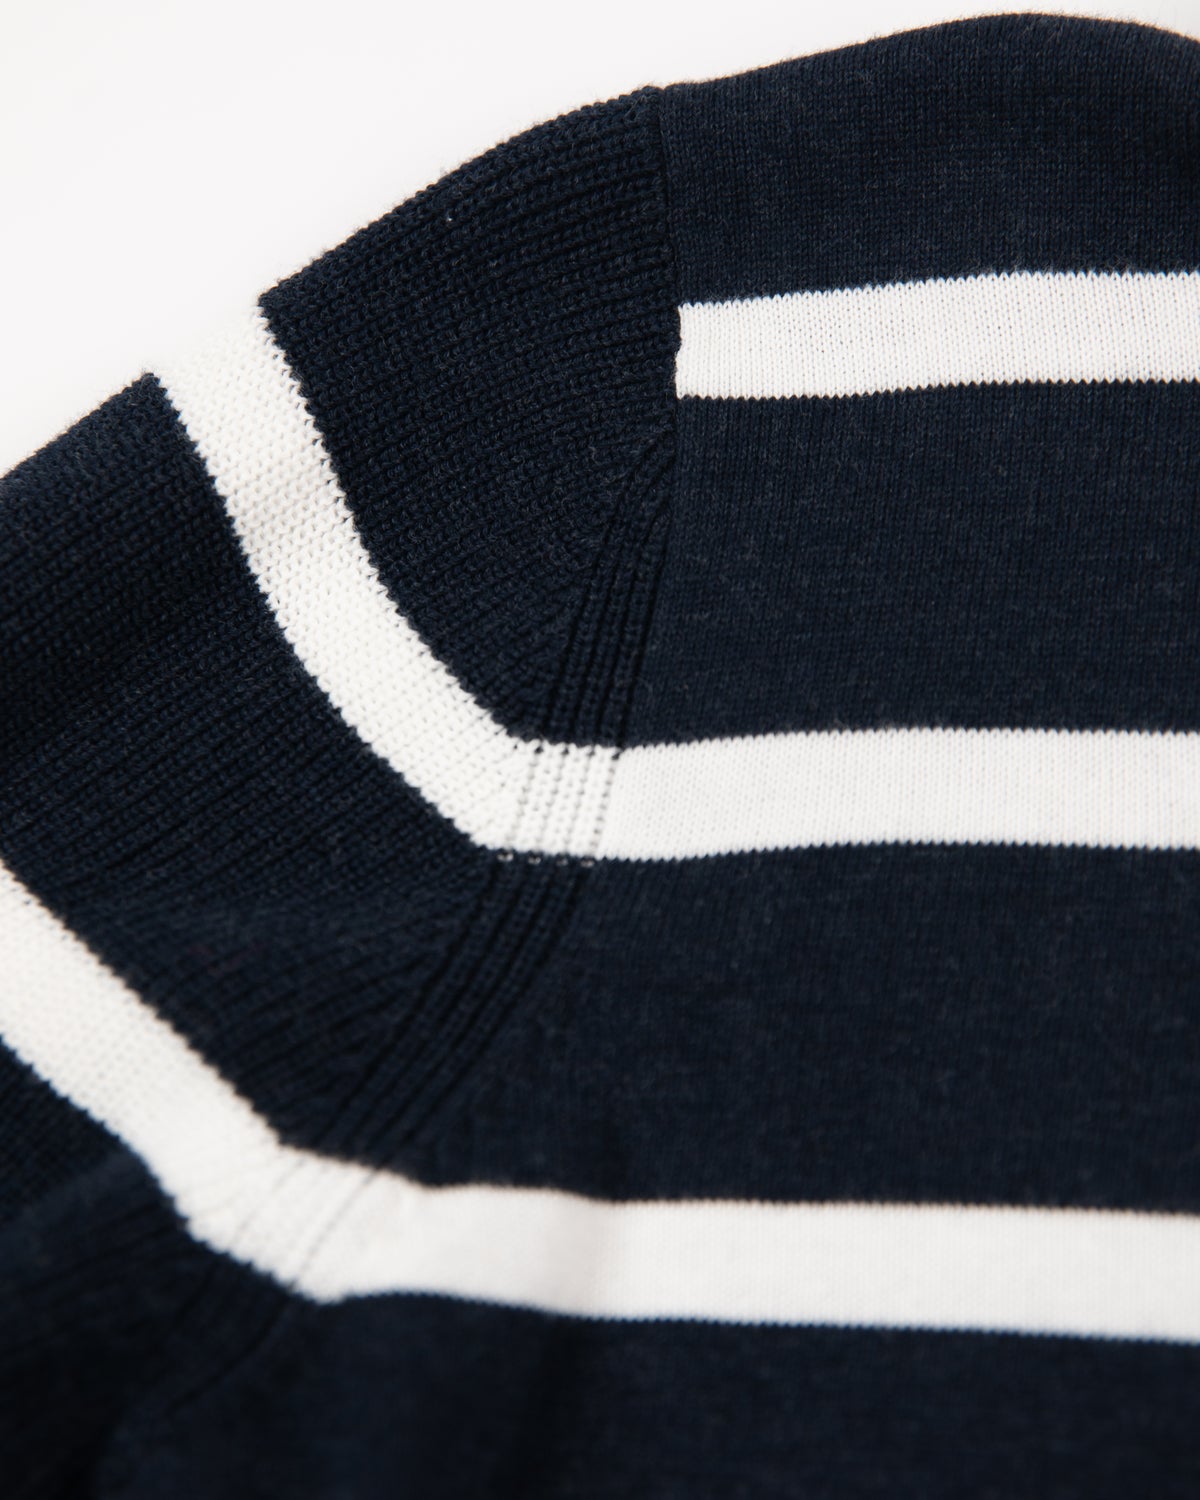 Rugby Shirt blue - Charcoal Navy | NZA New Zealand Auckland